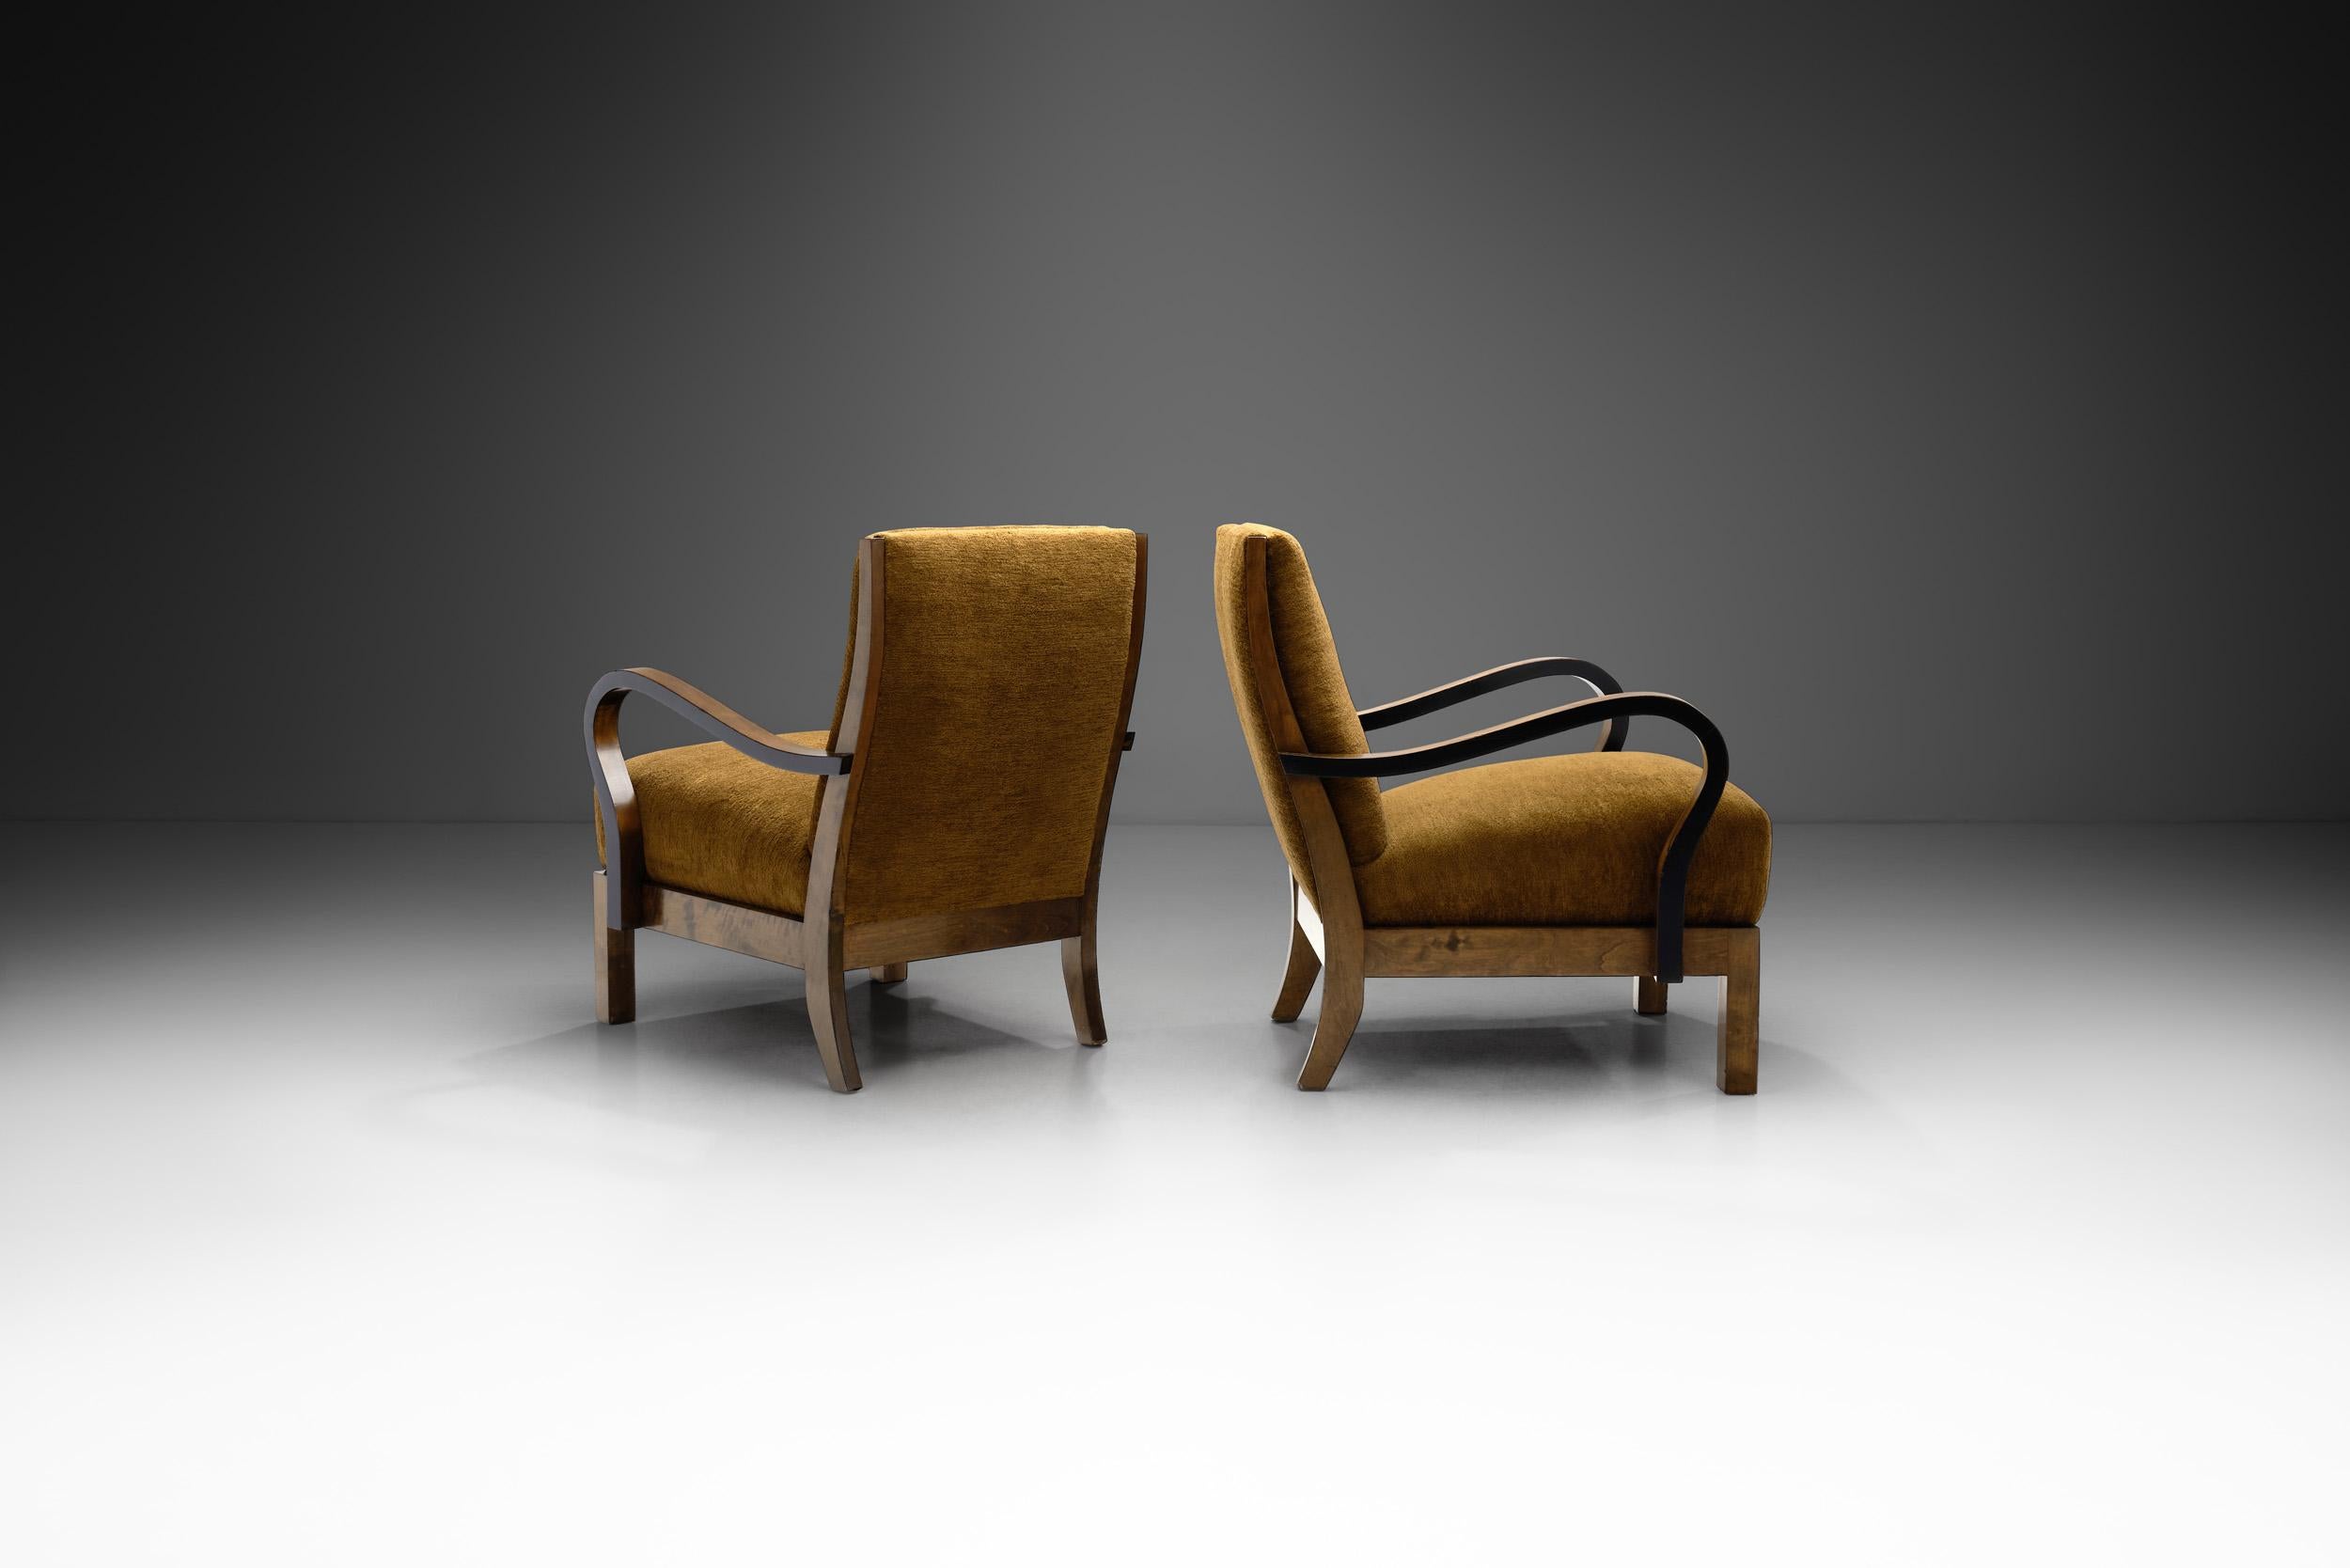 Mid-20th Century European Cabinetmaker Armchairs with Curved Arms, Europe, 1930s